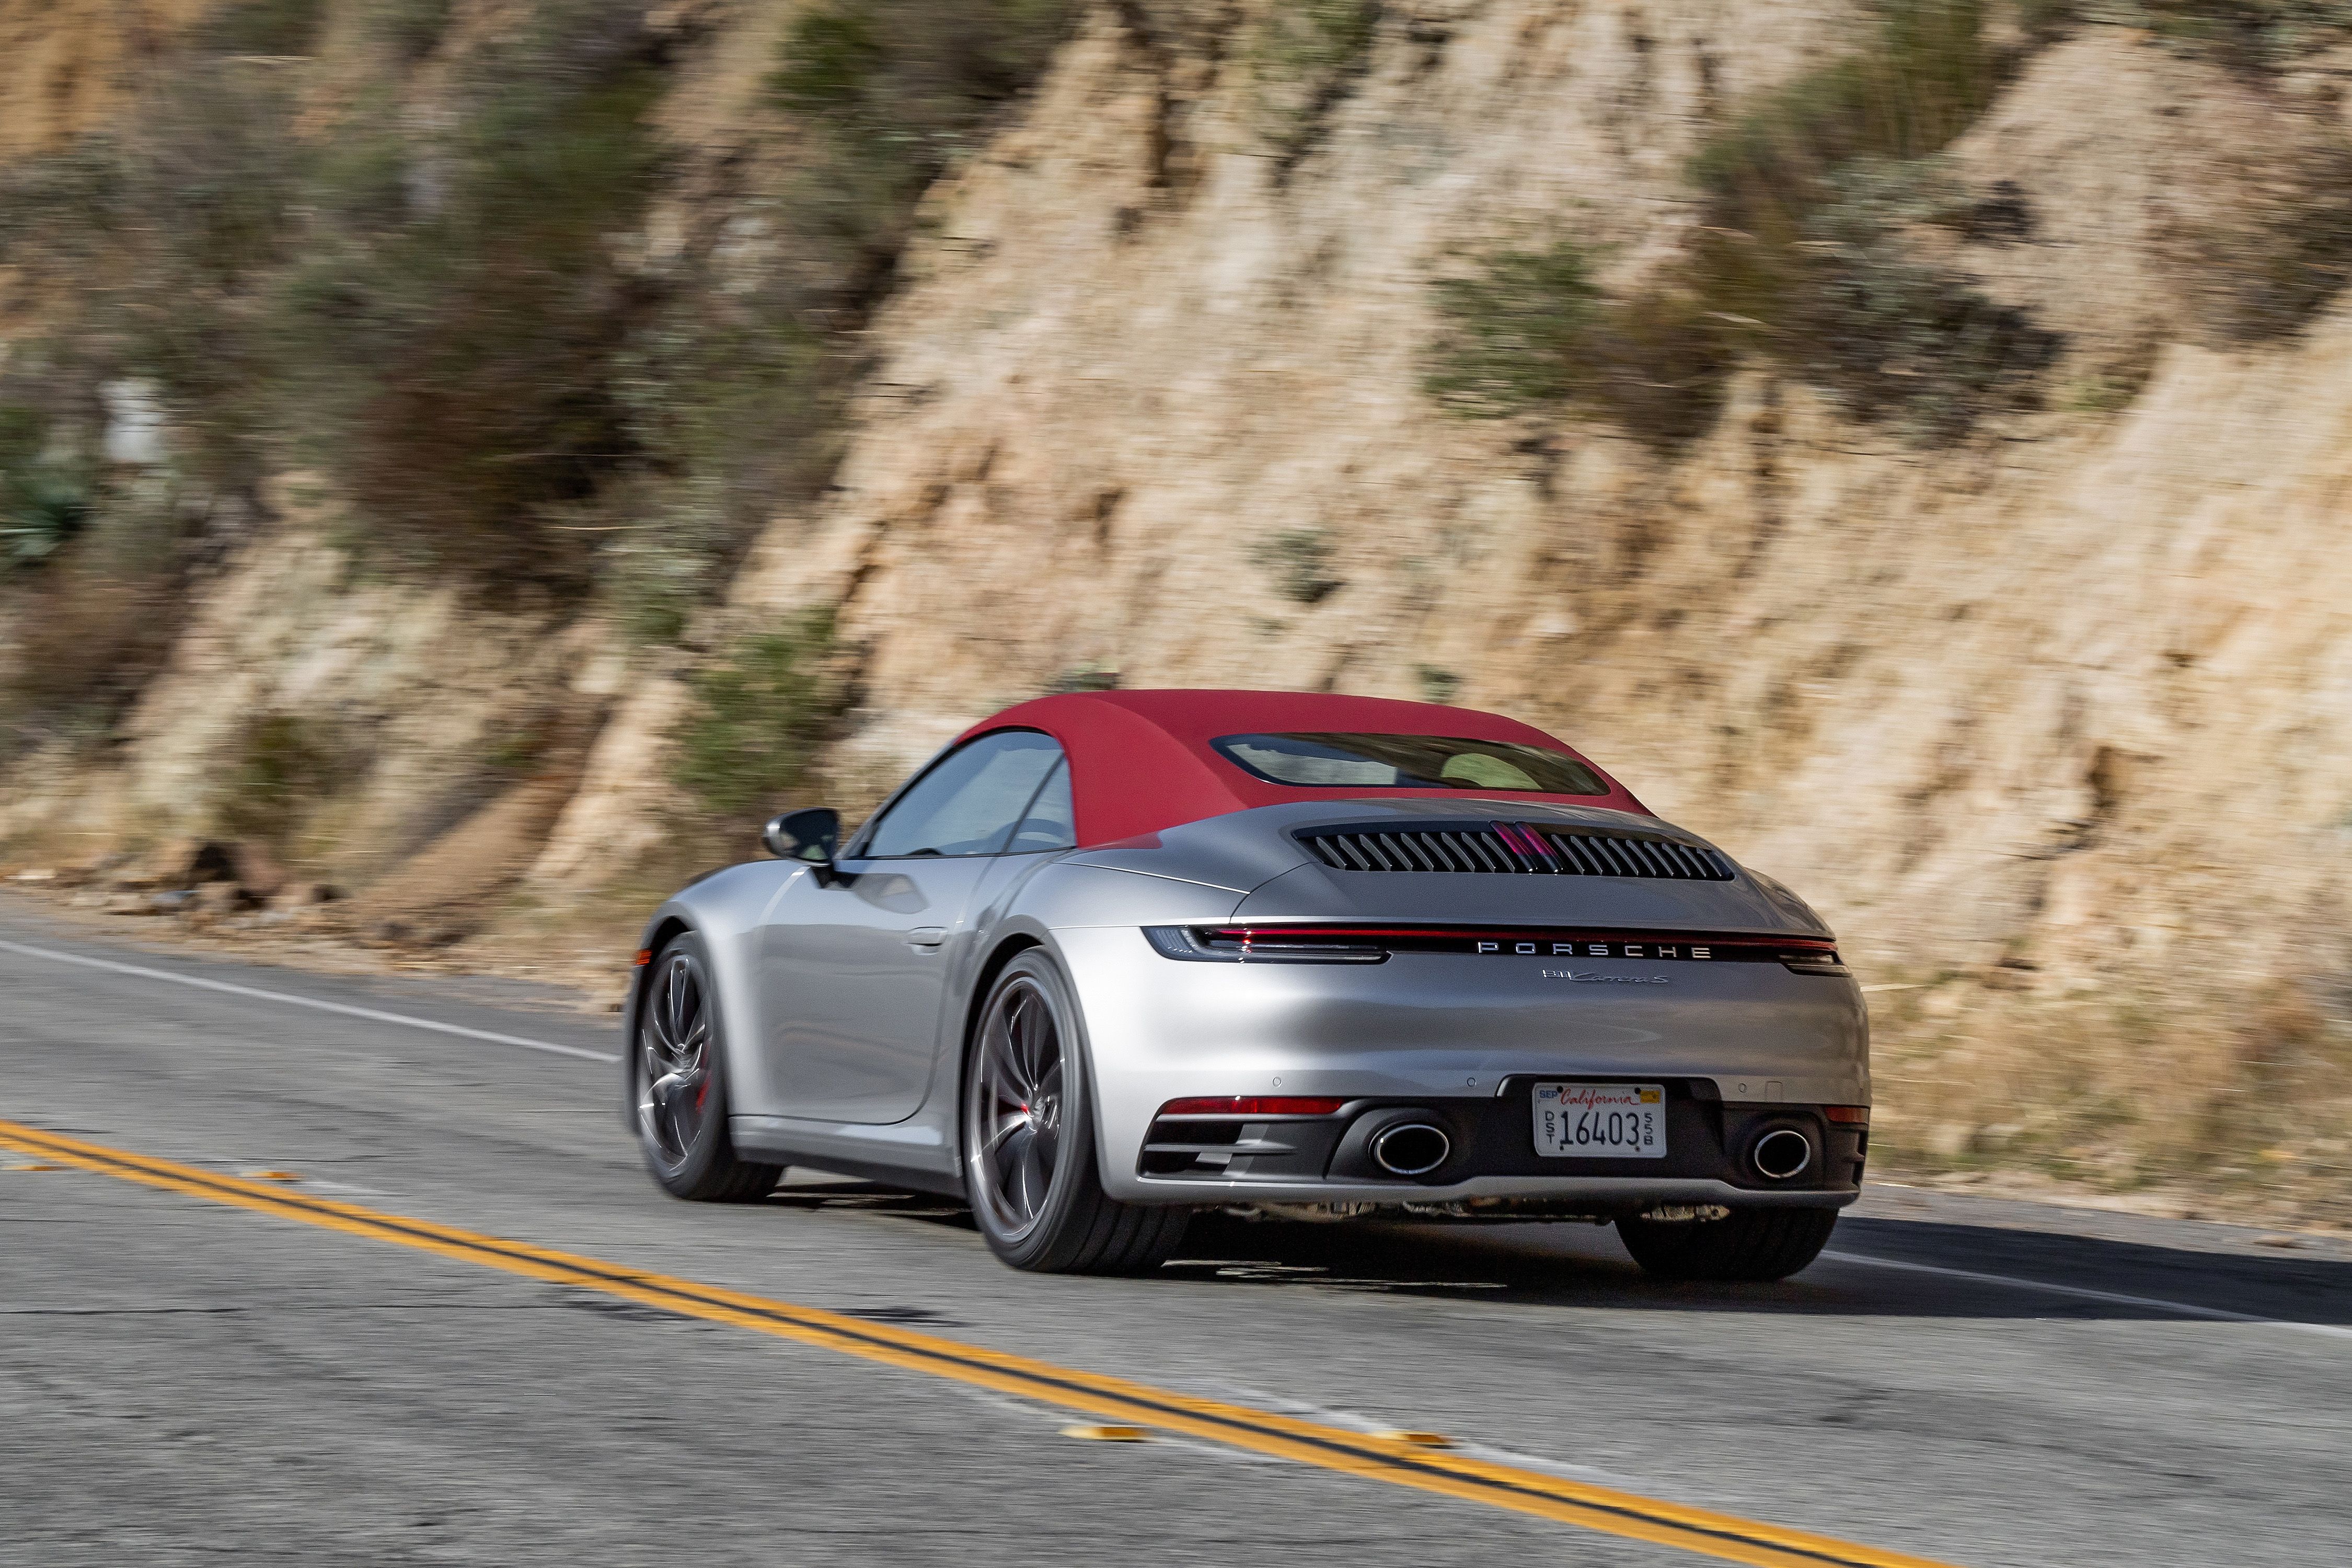 Tested: 2020 Porsche 911 Carrera S Cabriolet Gives Up Little to the Coupe